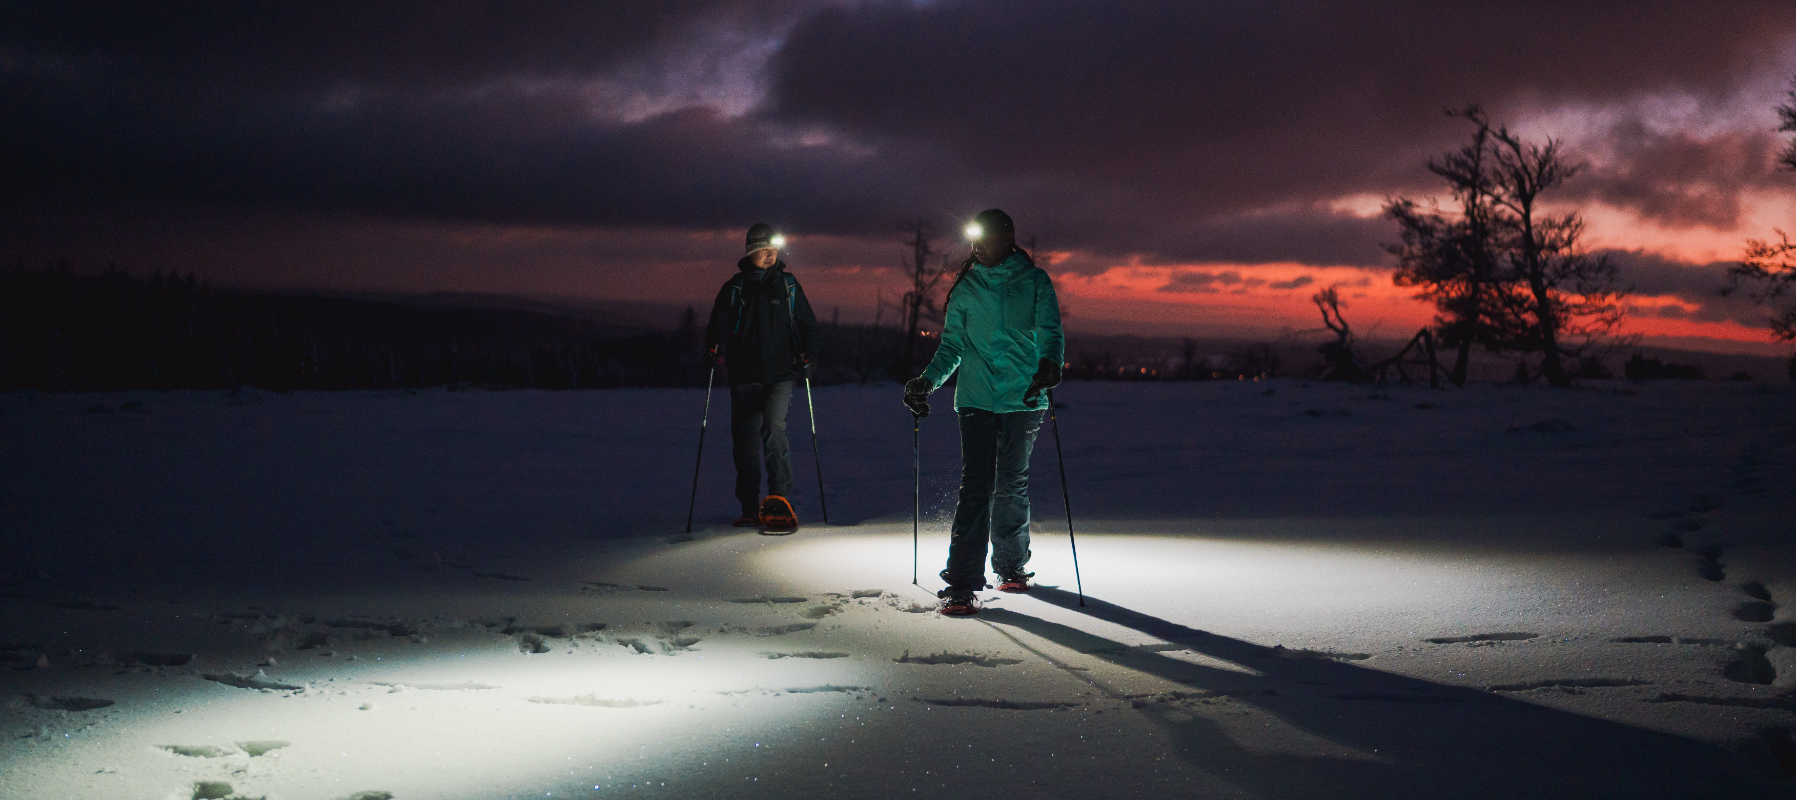 Two people are skiing in the night